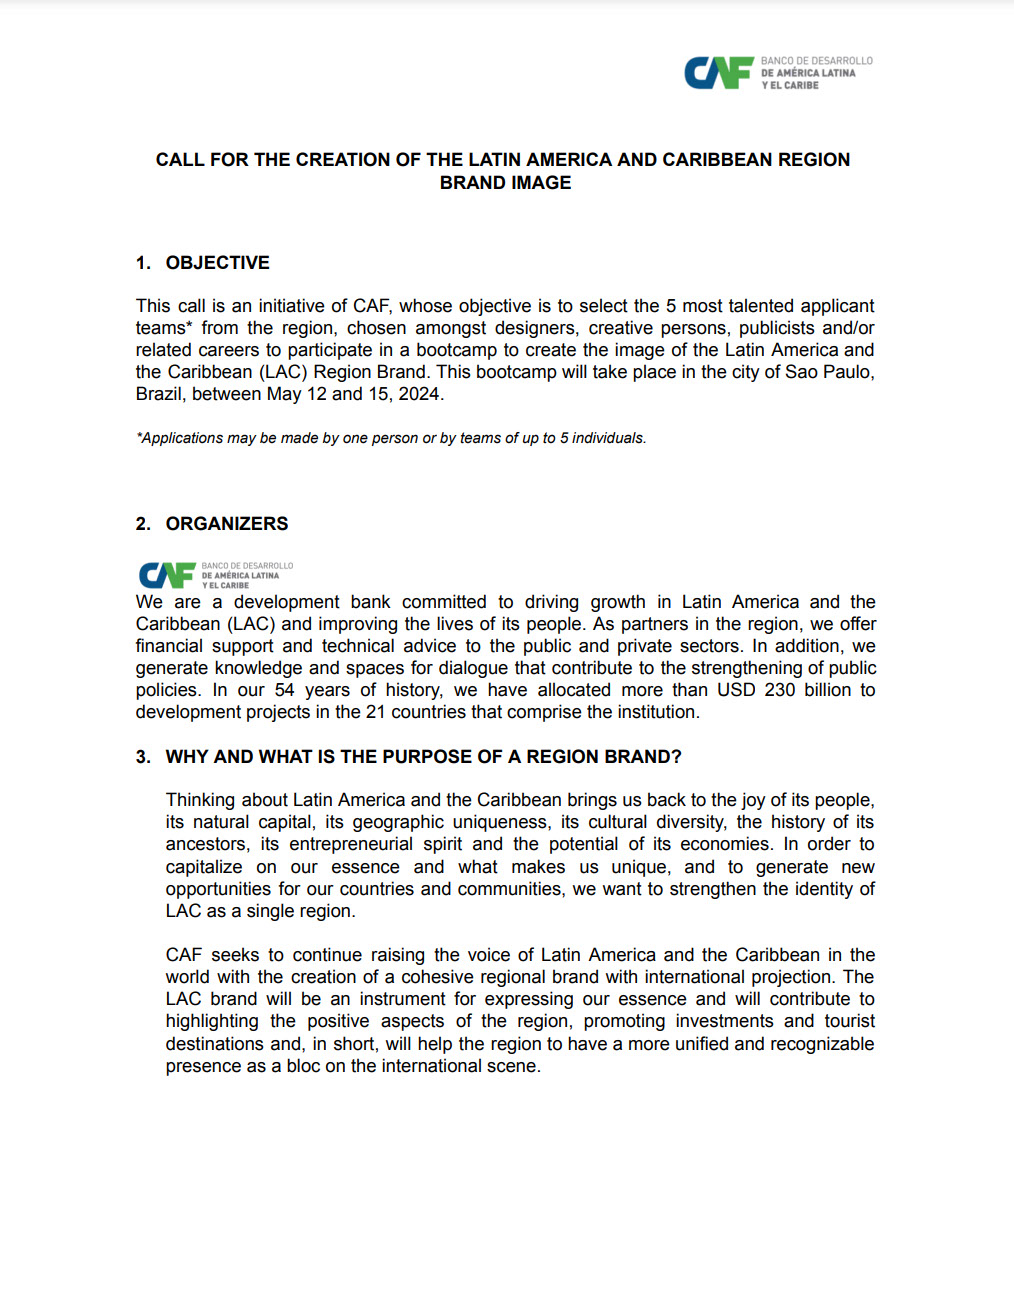 Terms and Conditions of the call for Latin America and the Caribbean Region Brand rendition image